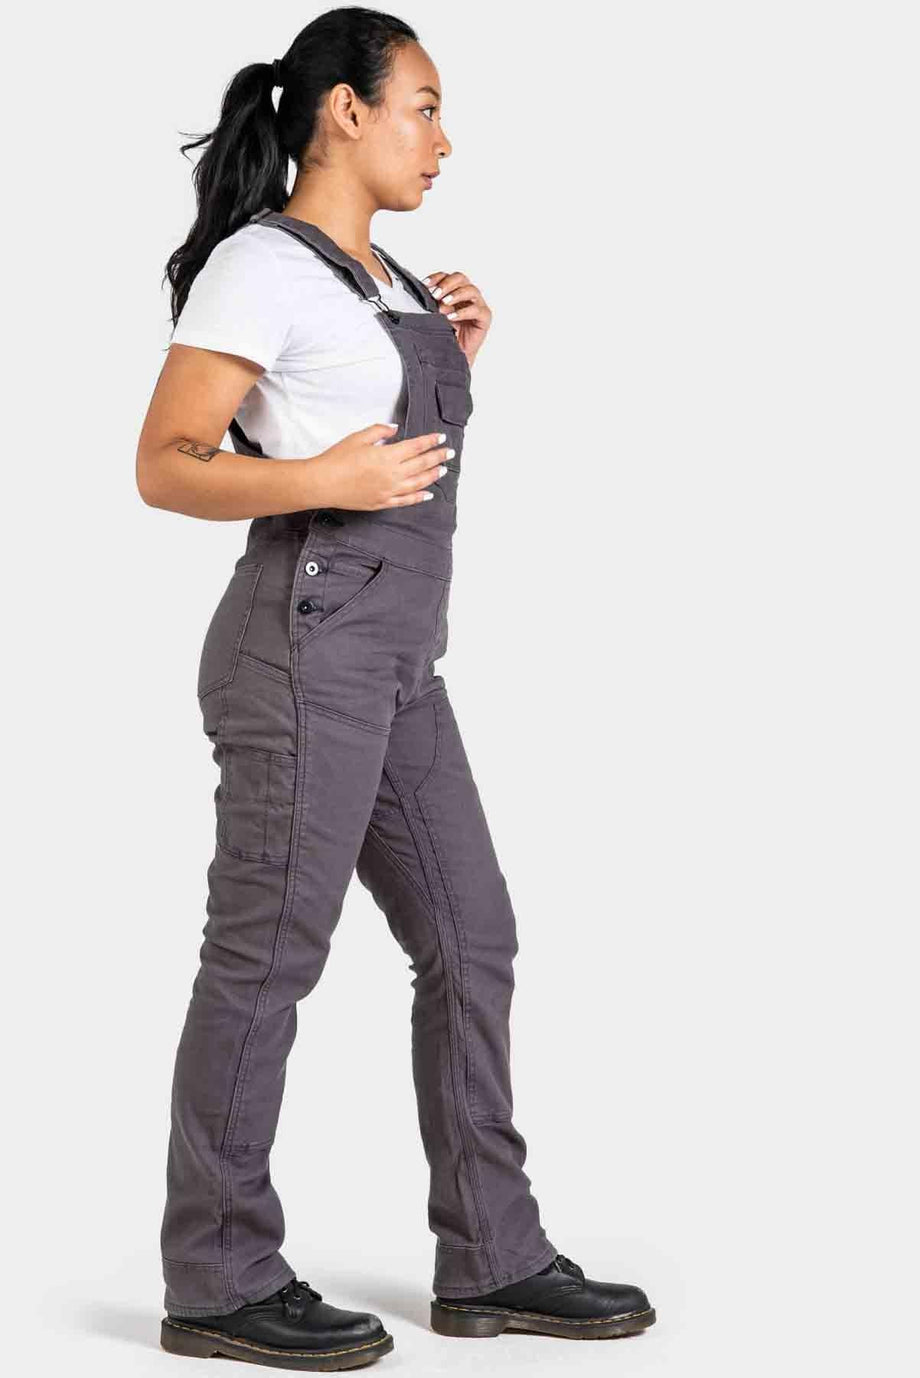 Dovetail Workwear Women's Grey Canvas Work Pants (14 X 30) in the Pants  department at